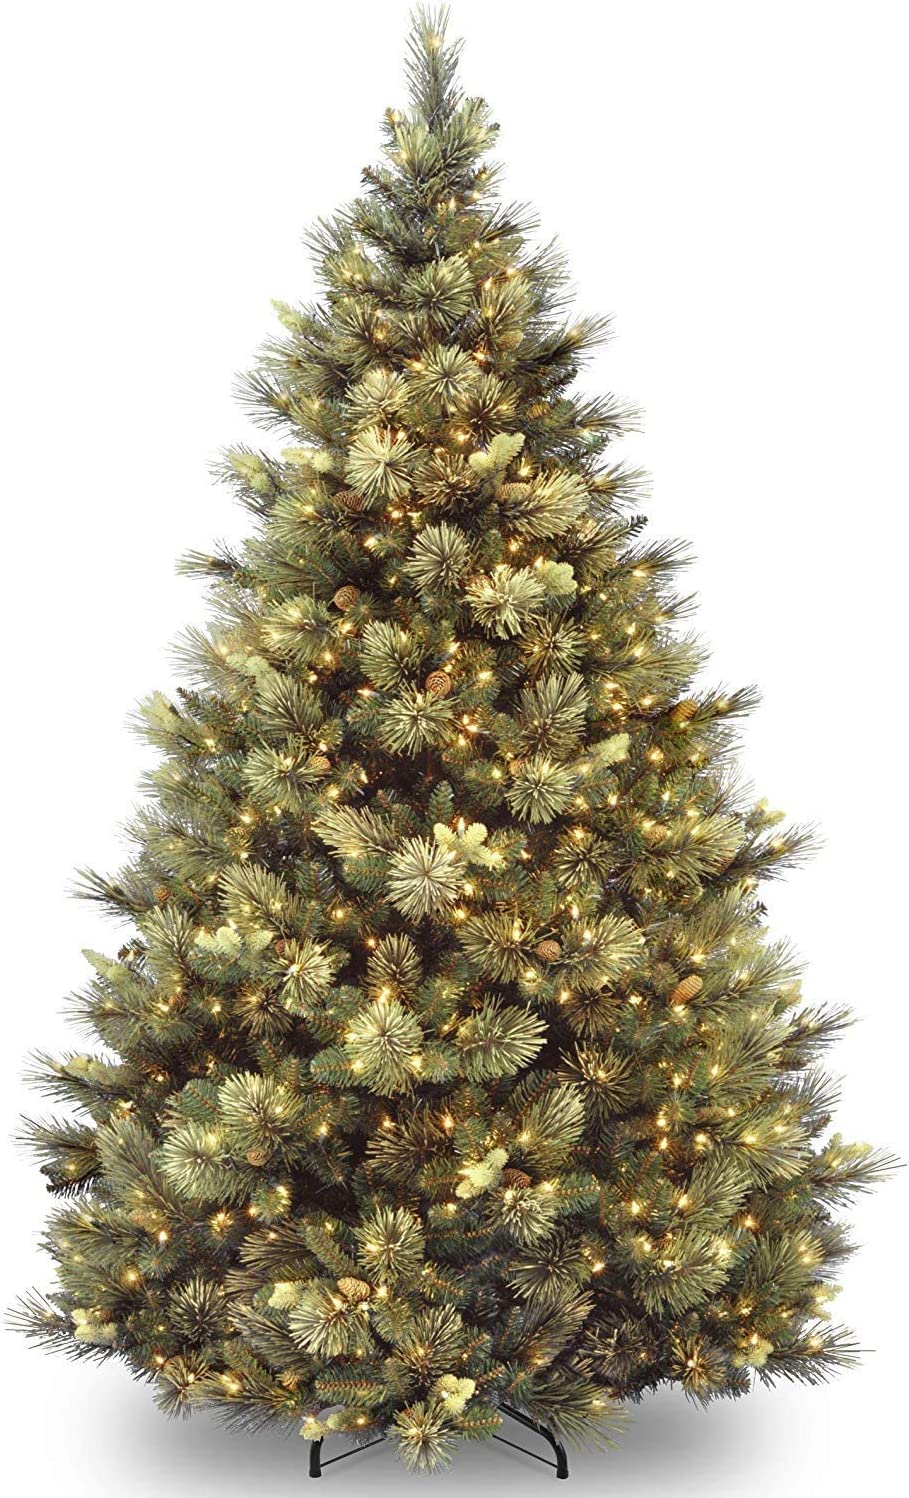  3. Pre-lit Artificial Flocked Christmas Tree by National Tree Company 